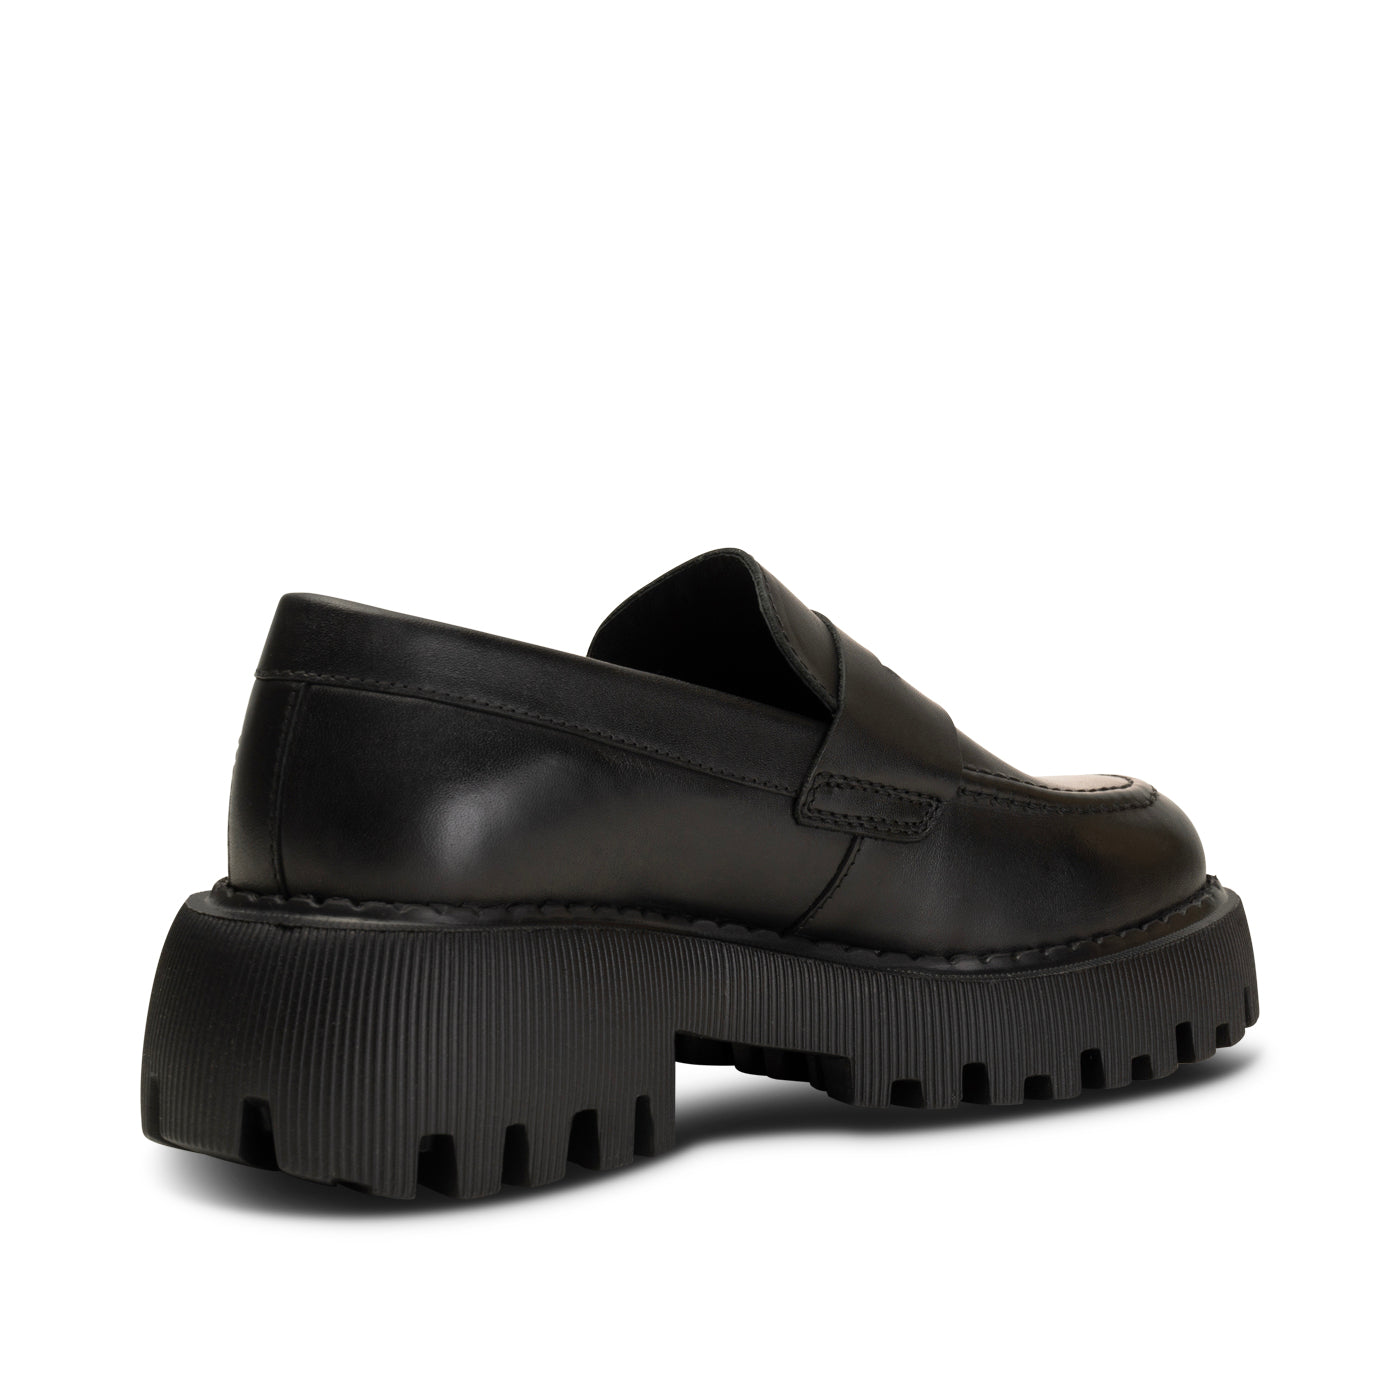 SHOE THE BEAR WOMENS Posey Loafer Læder Loafers 110 BLACK